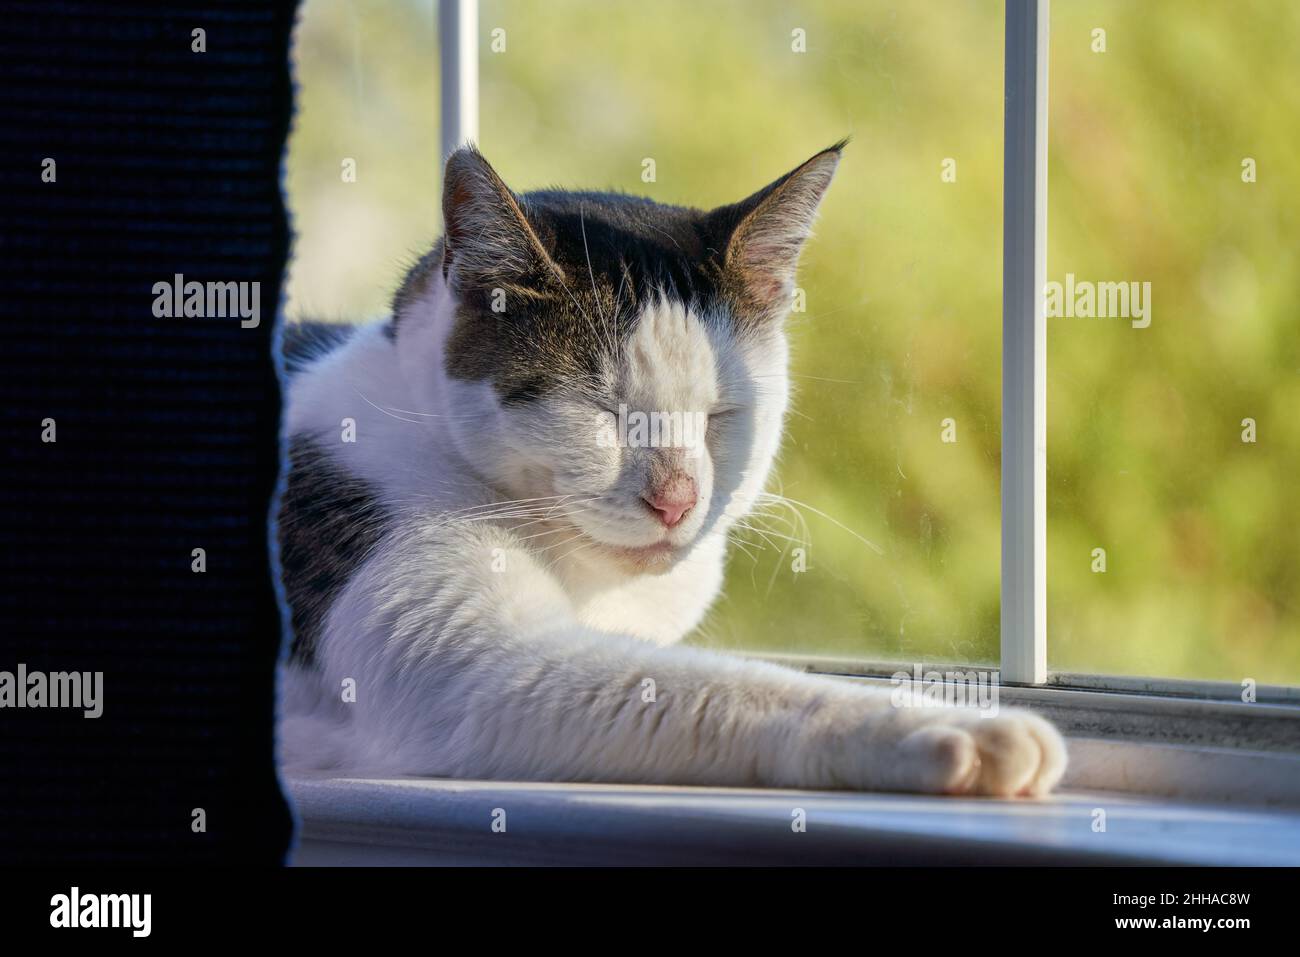 Cat - adult, male, white and grey - sleeps on window sill. Stock Photo